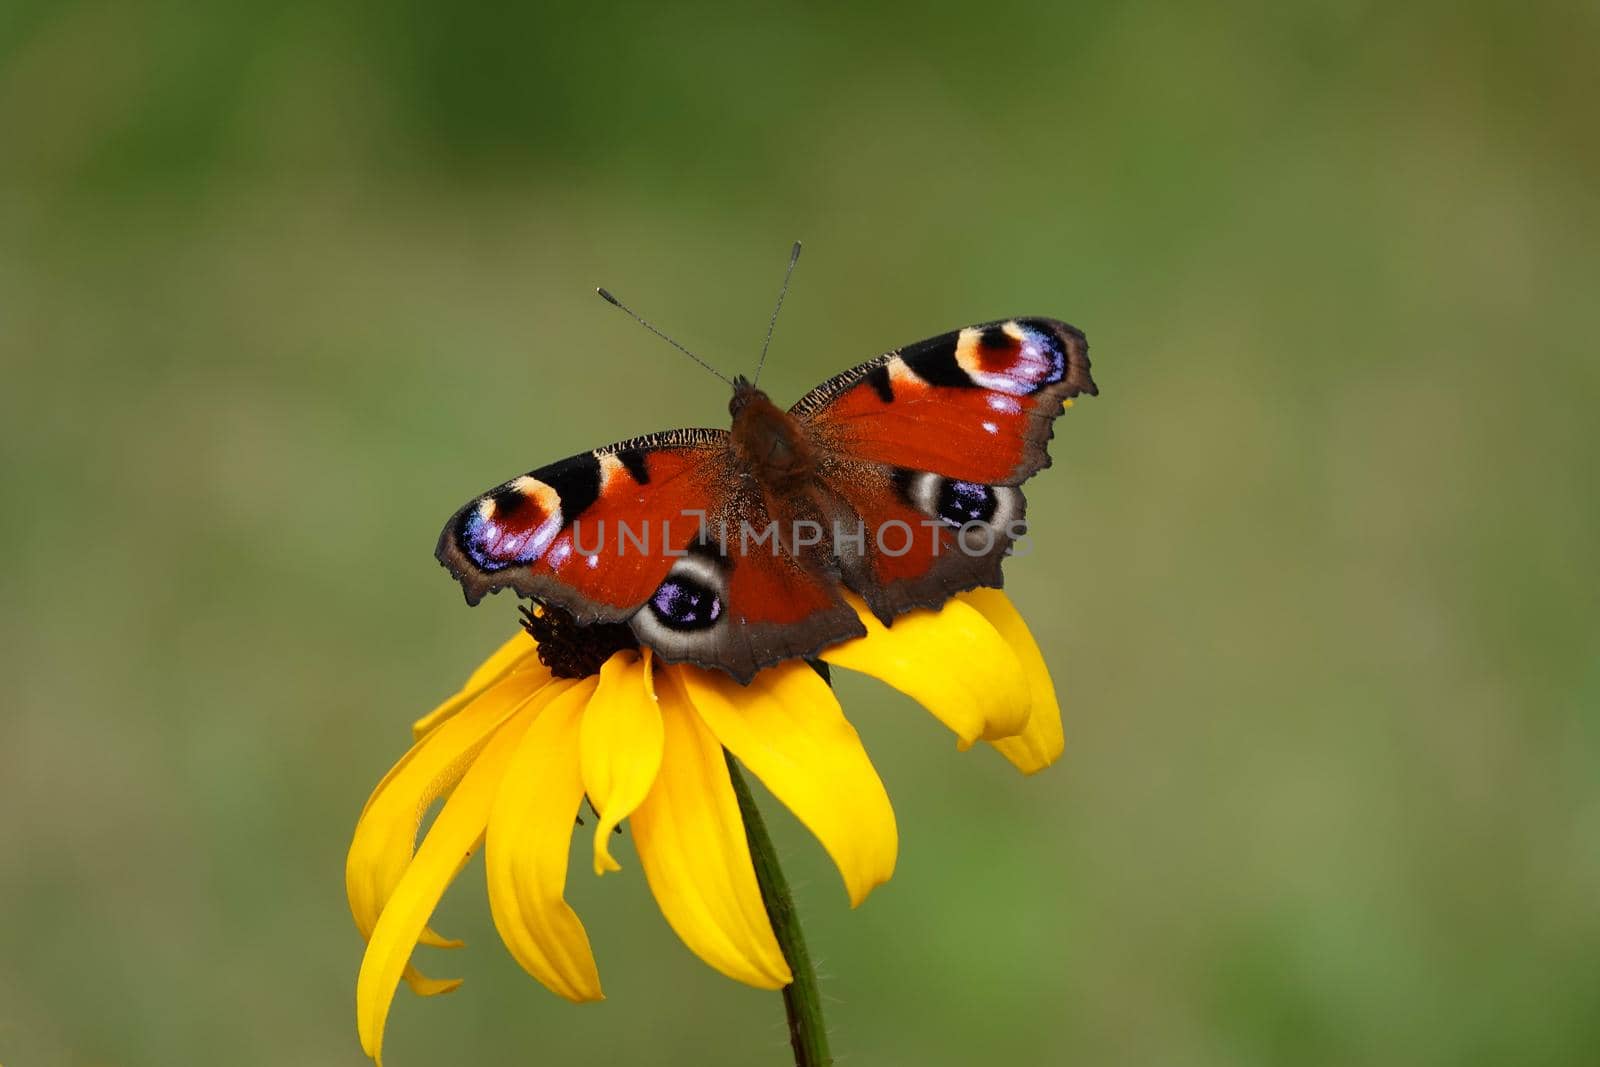 A Peacock butterfly ( European peacock or Aglais io) on a yellow Rudbeckia flower. Blurred green background